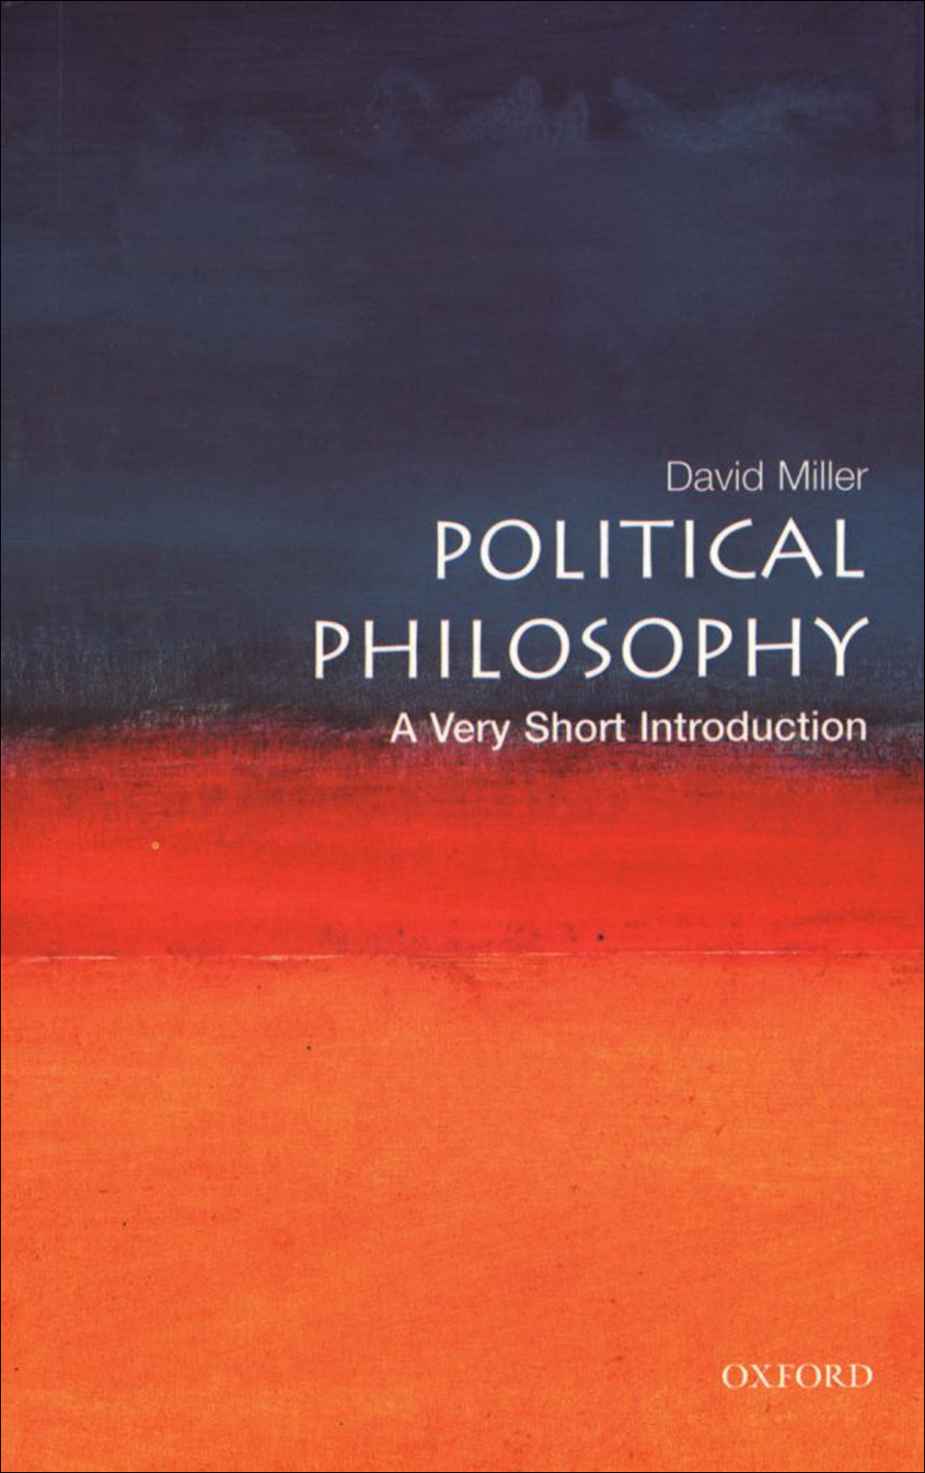 Political Philosophy: A Very Short Introduction (Very Short Introductions)